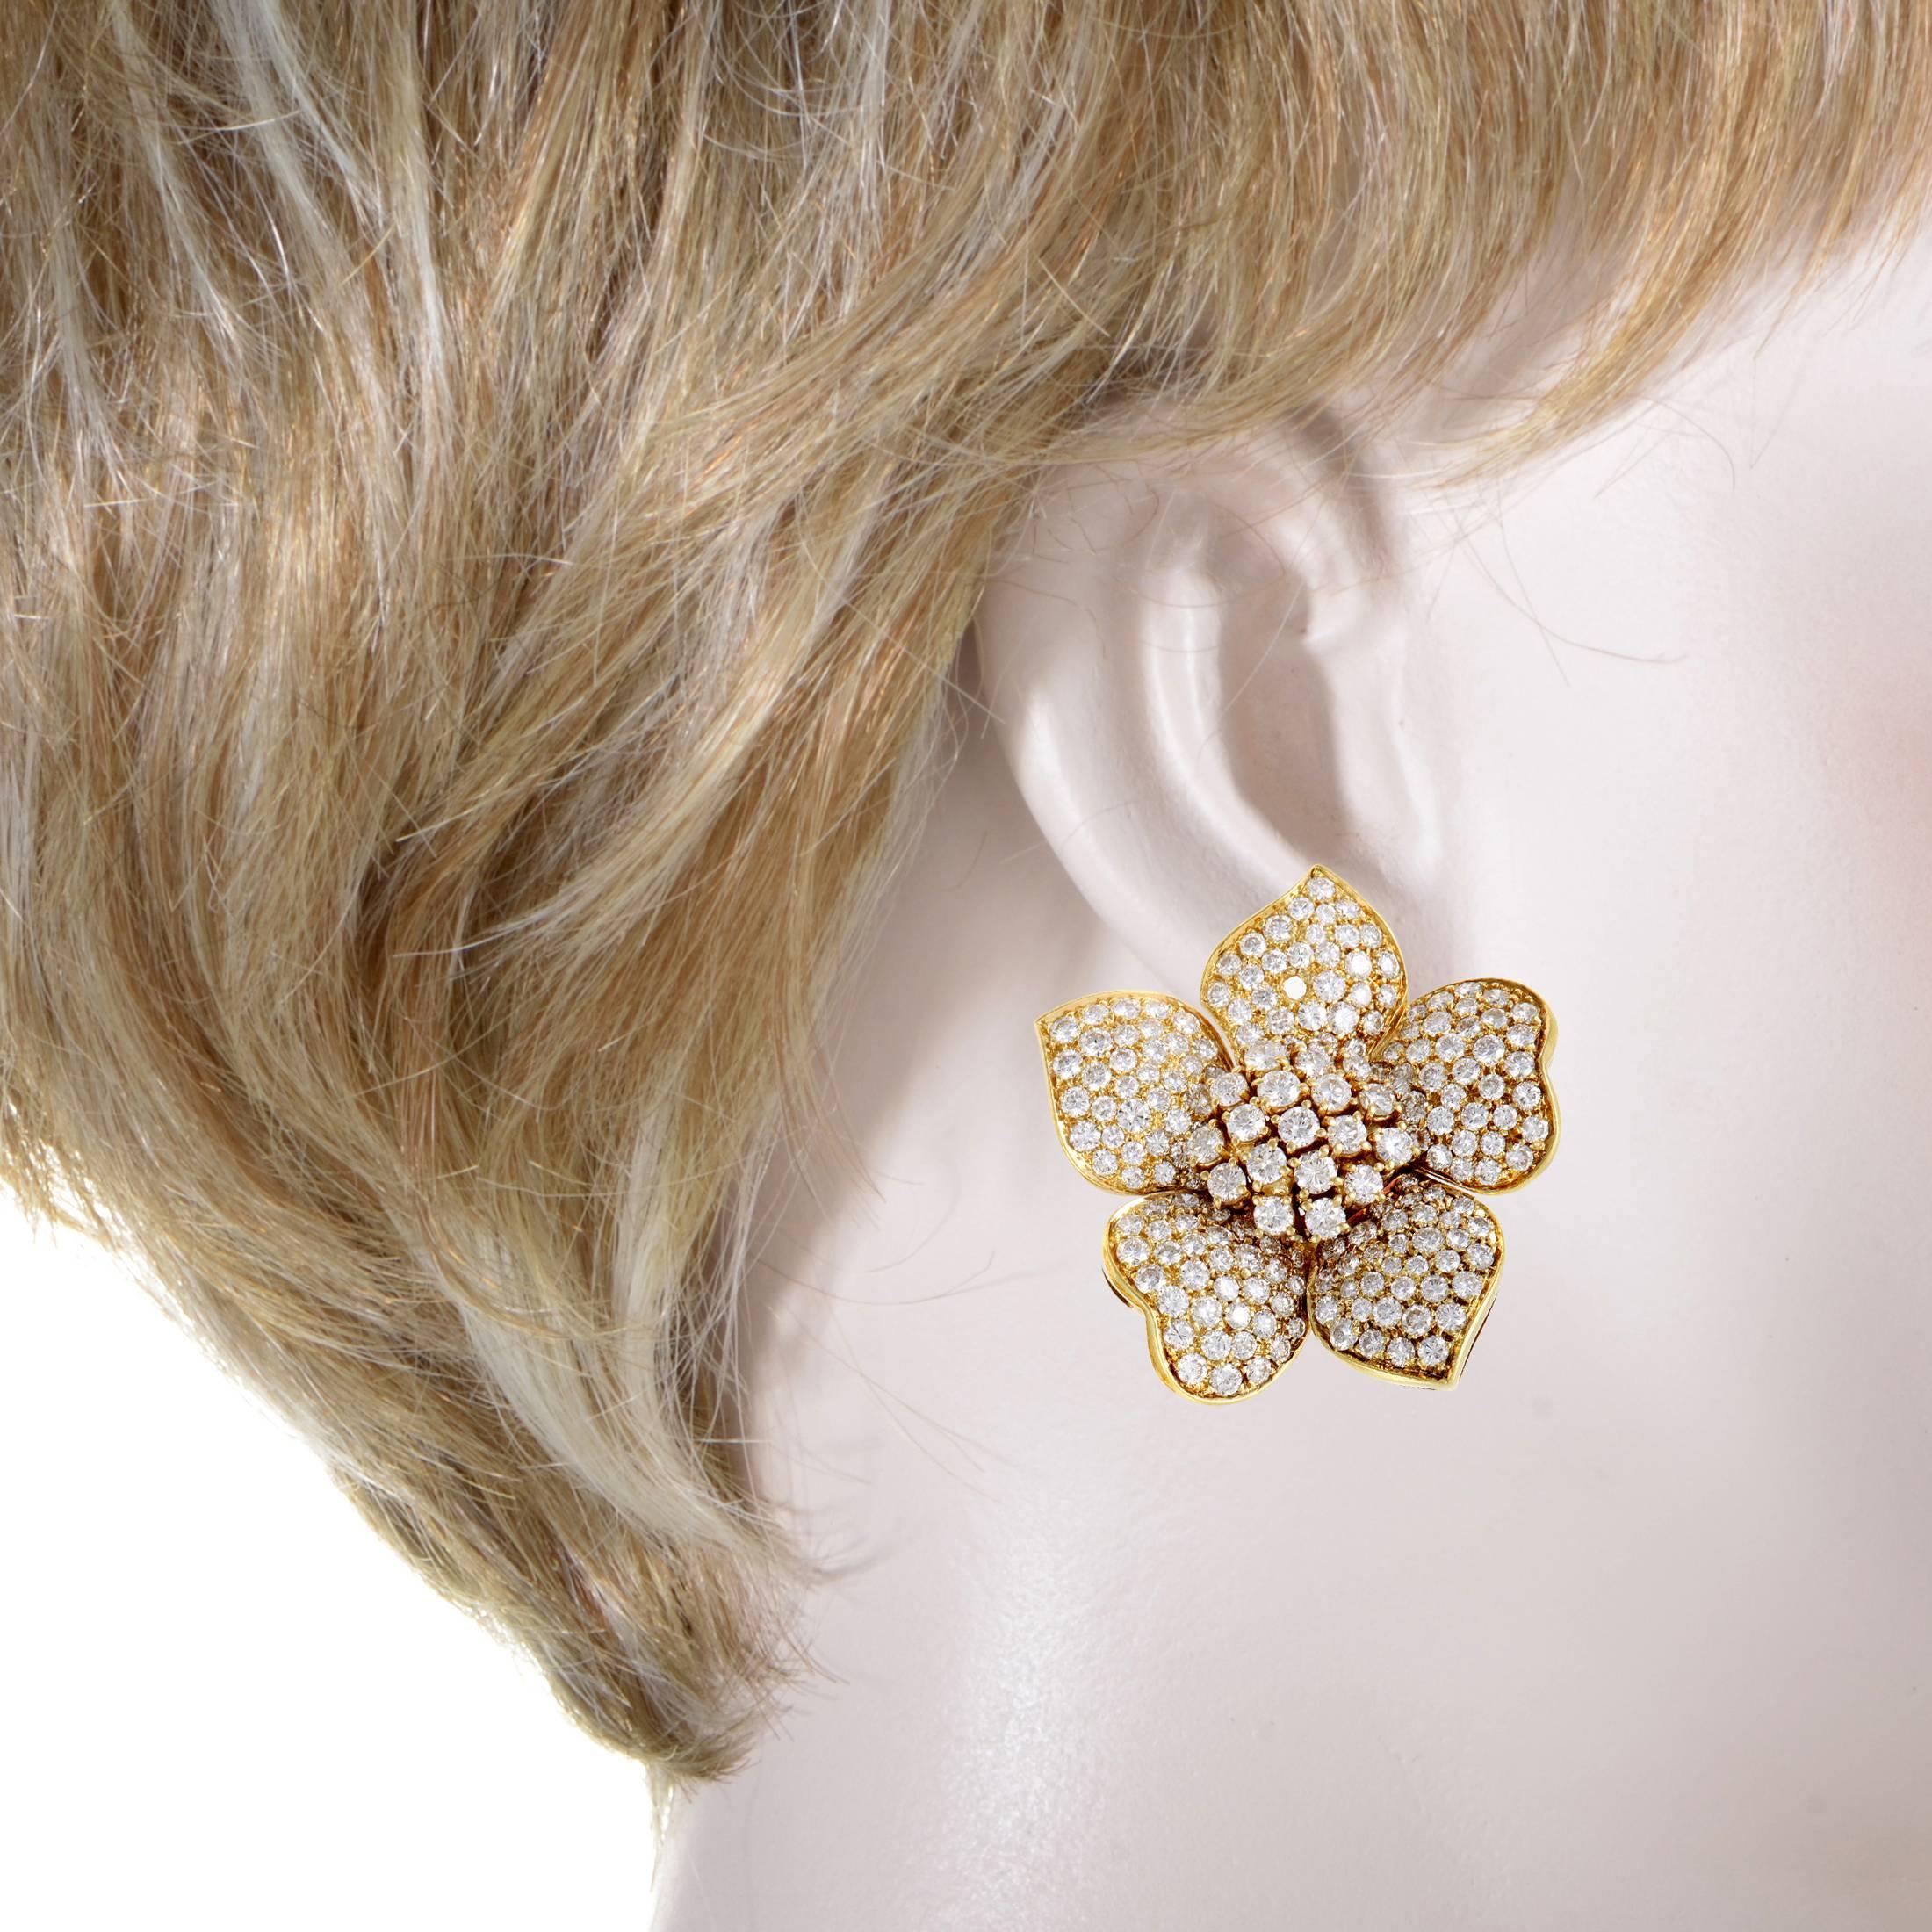 The delightful beauty of flowers is brilliantly translated into a luxurious design through glamorous combination of radiant 18K yellow gold and glittering diamonds amounting approximately to 7.50 carats in these glorious and lavish earrings.